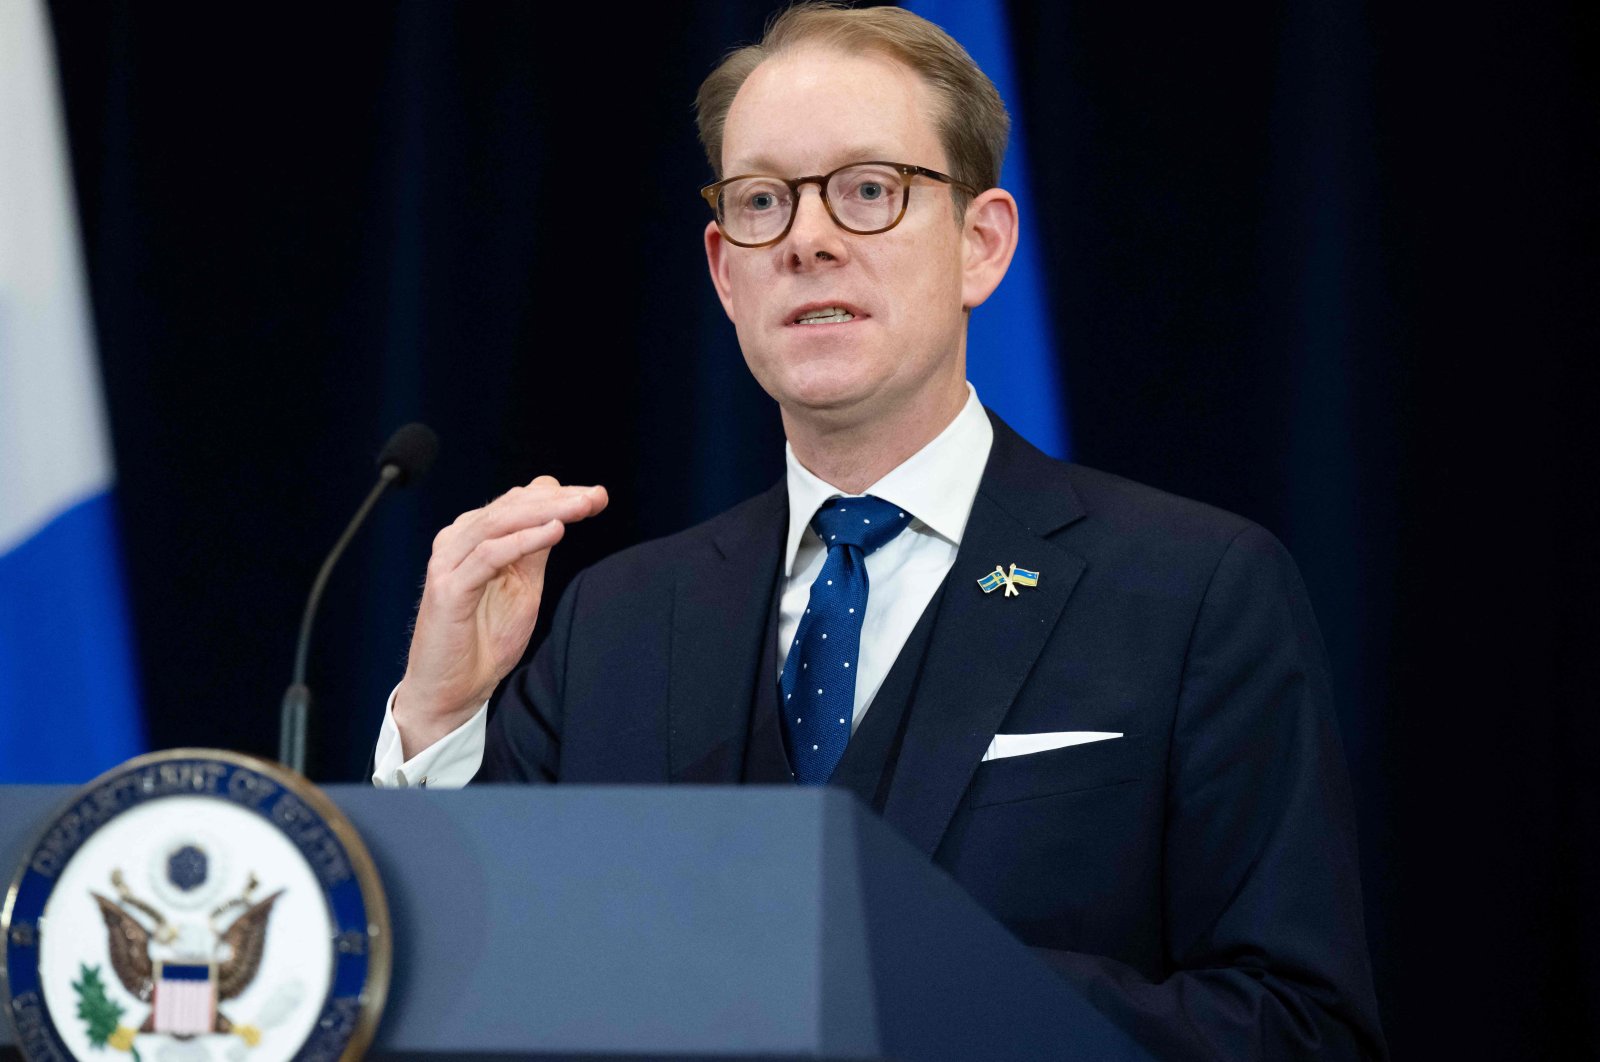 Swedish Foreign Minister Tobias Billström speaks during a news conference following meetings at the State Department in Washington, D.C., U.S., Dec. 8, 2022. (AFP Photo)